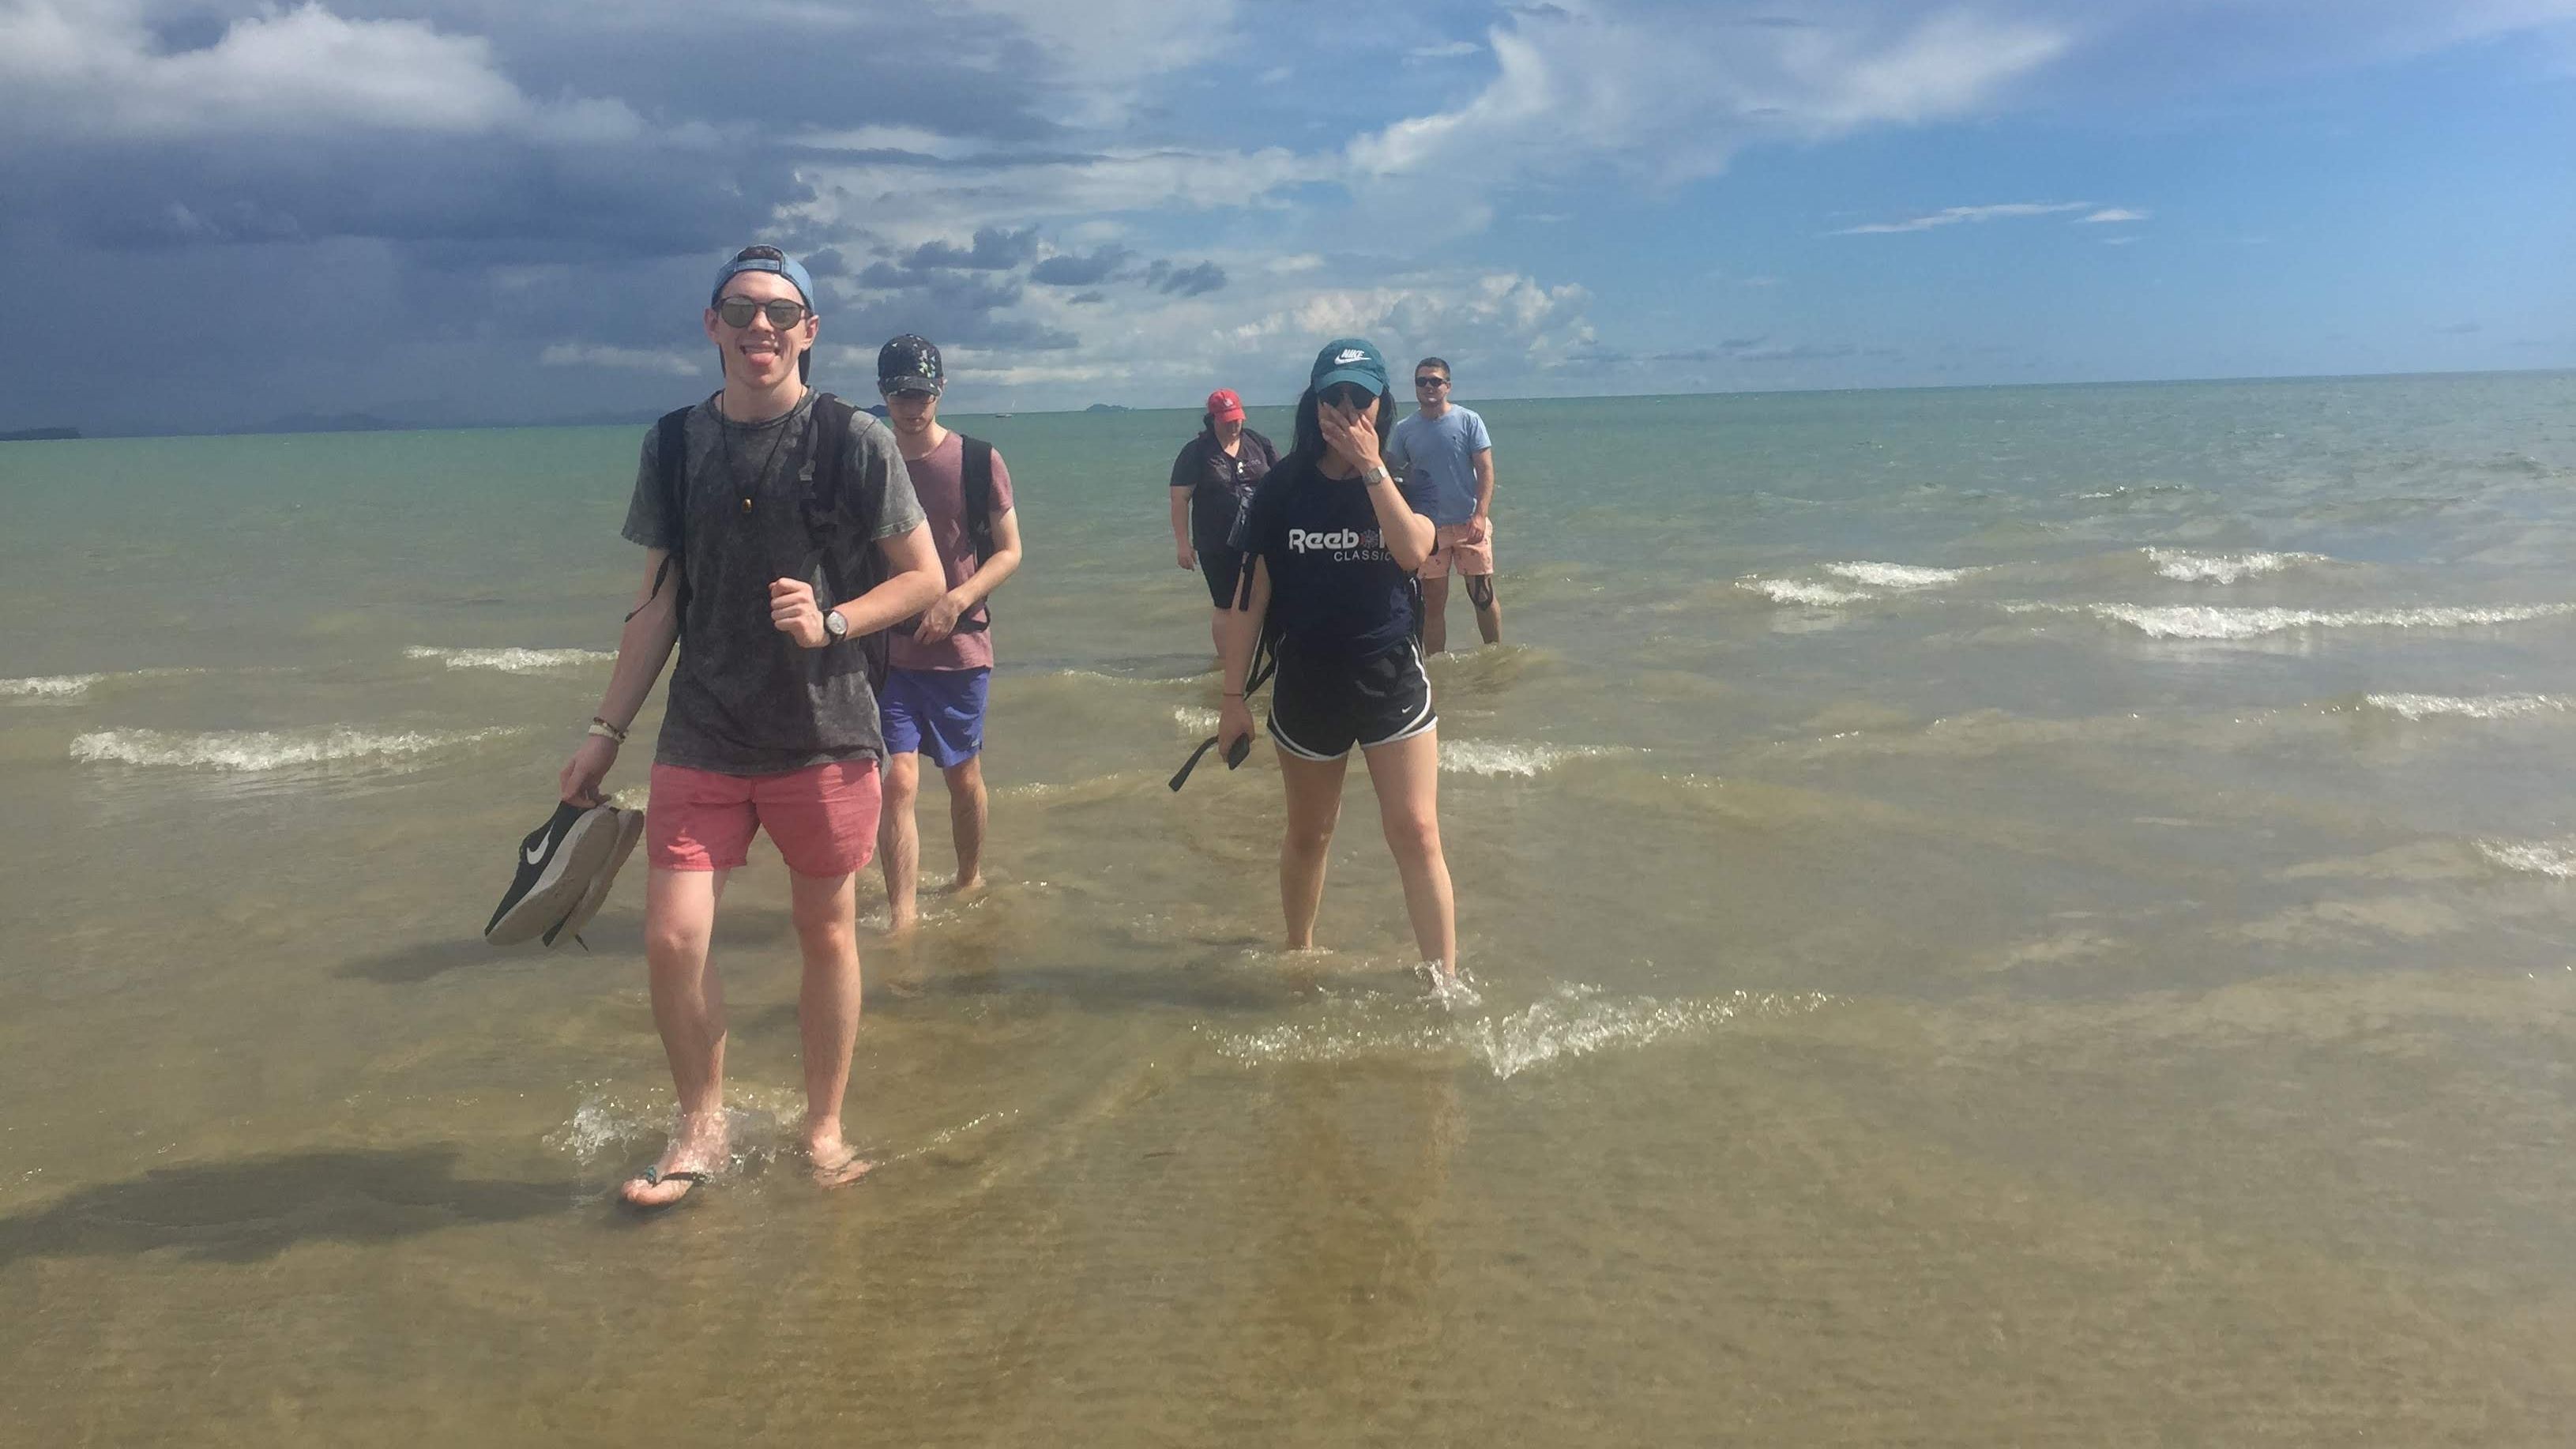 Josh and his friends wading ankle deep through a sunny beach while studying abroad